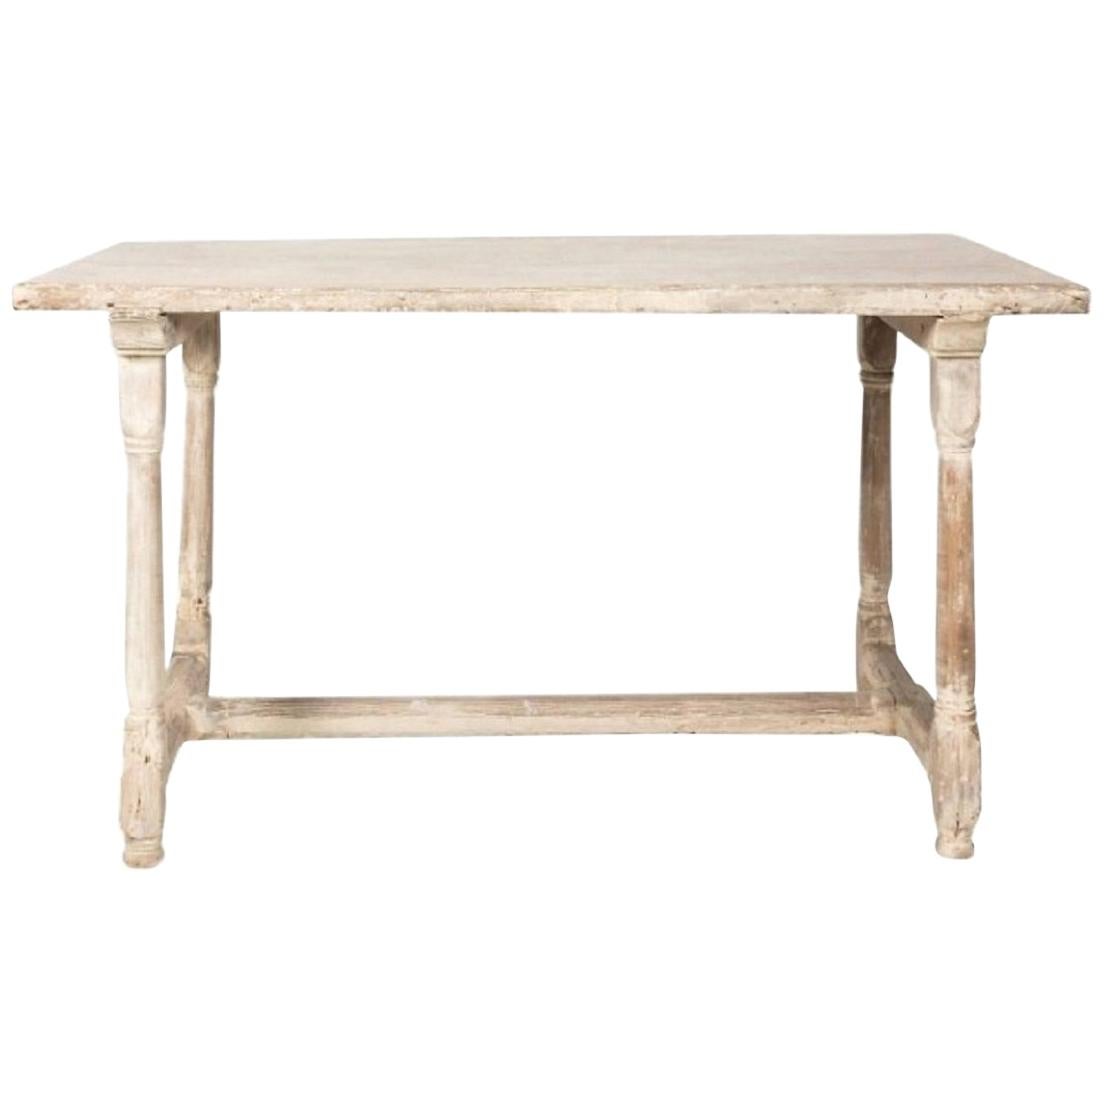 Antique Swedish Country White Washed Elm Dining Table